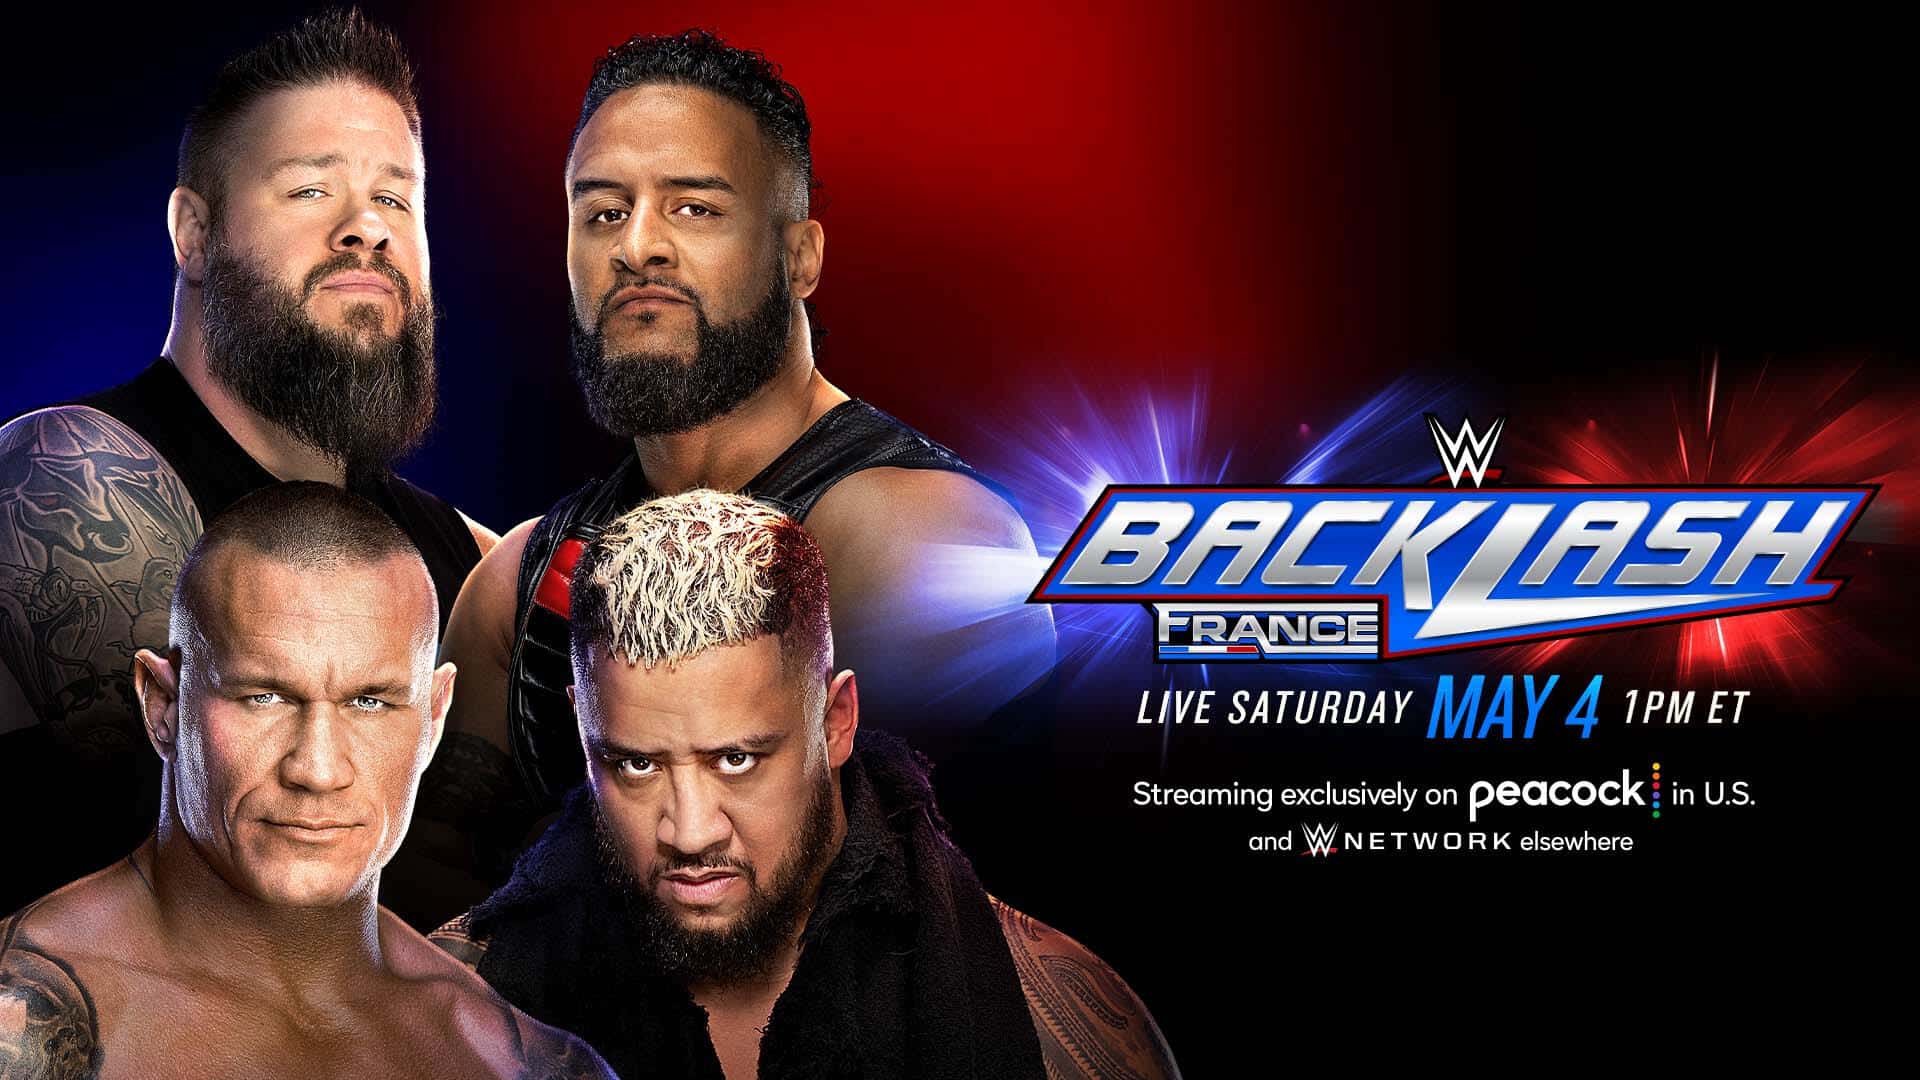 France Witnesses The Bloodline’s Victory Over Randy Orton & Kevin Owens at WWE Backlash